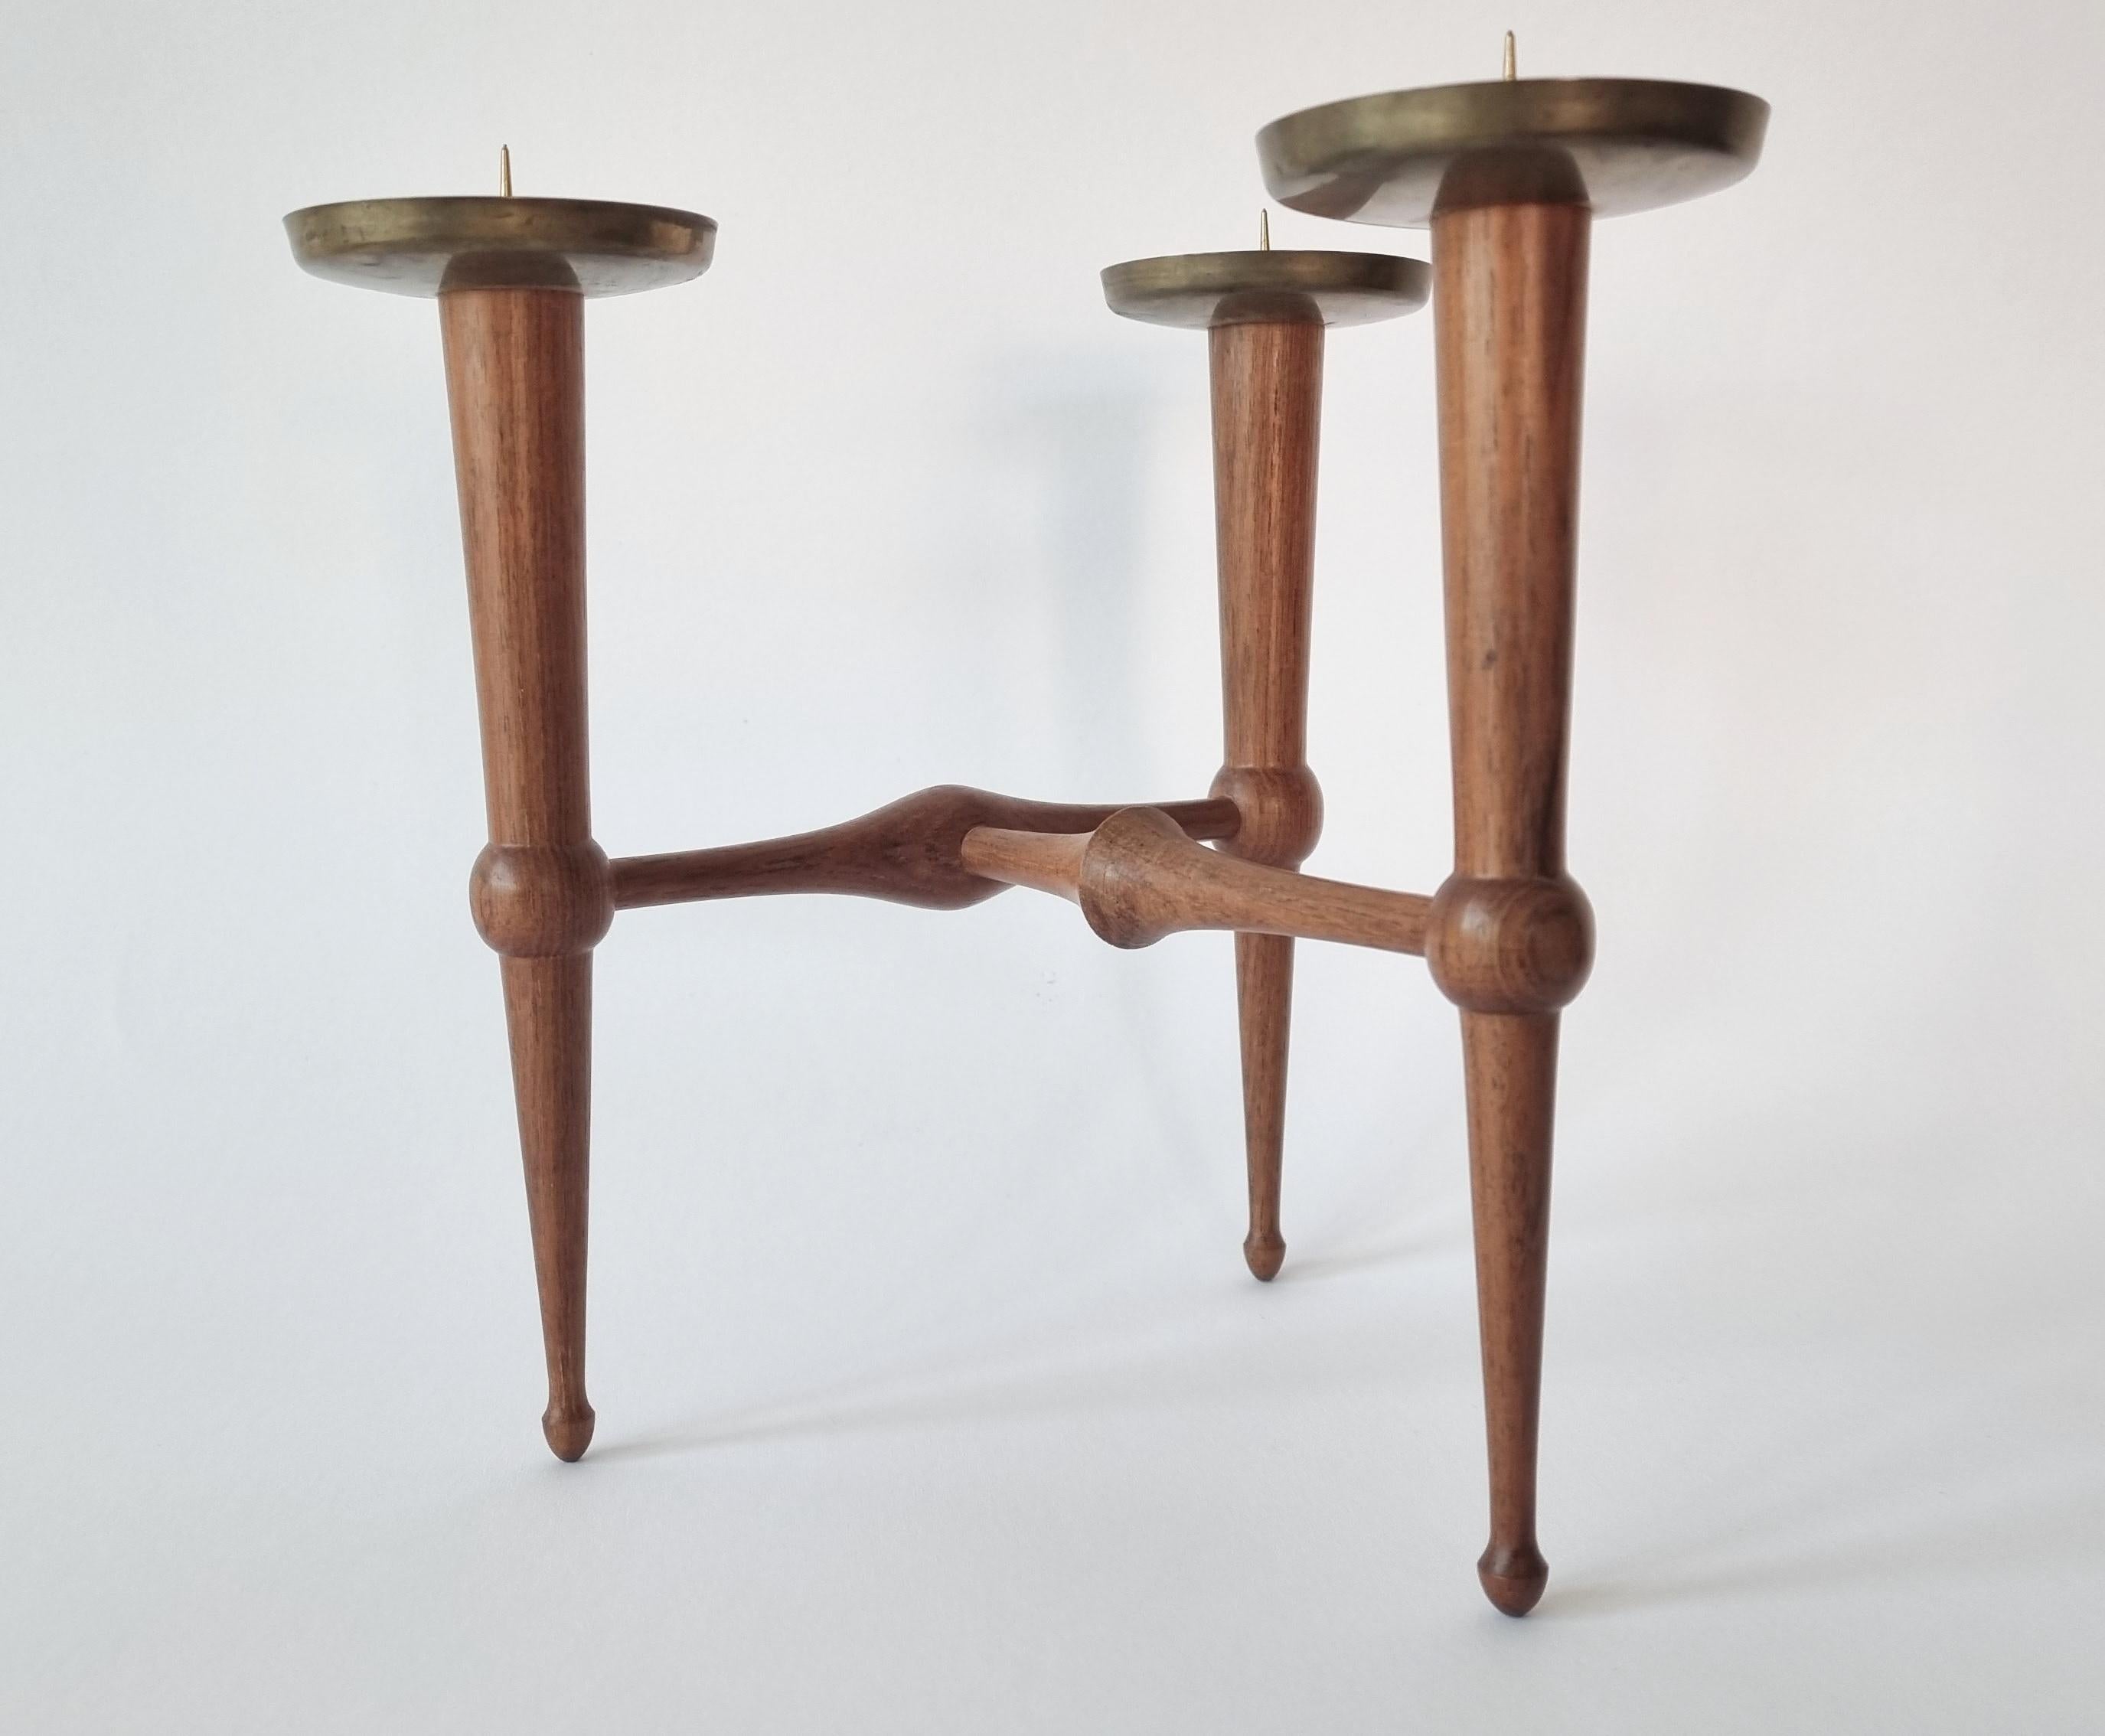 Midcentury Teak and Brass Rare Table Candle Holder / Stick, Denmark, 1960s For Sale 6